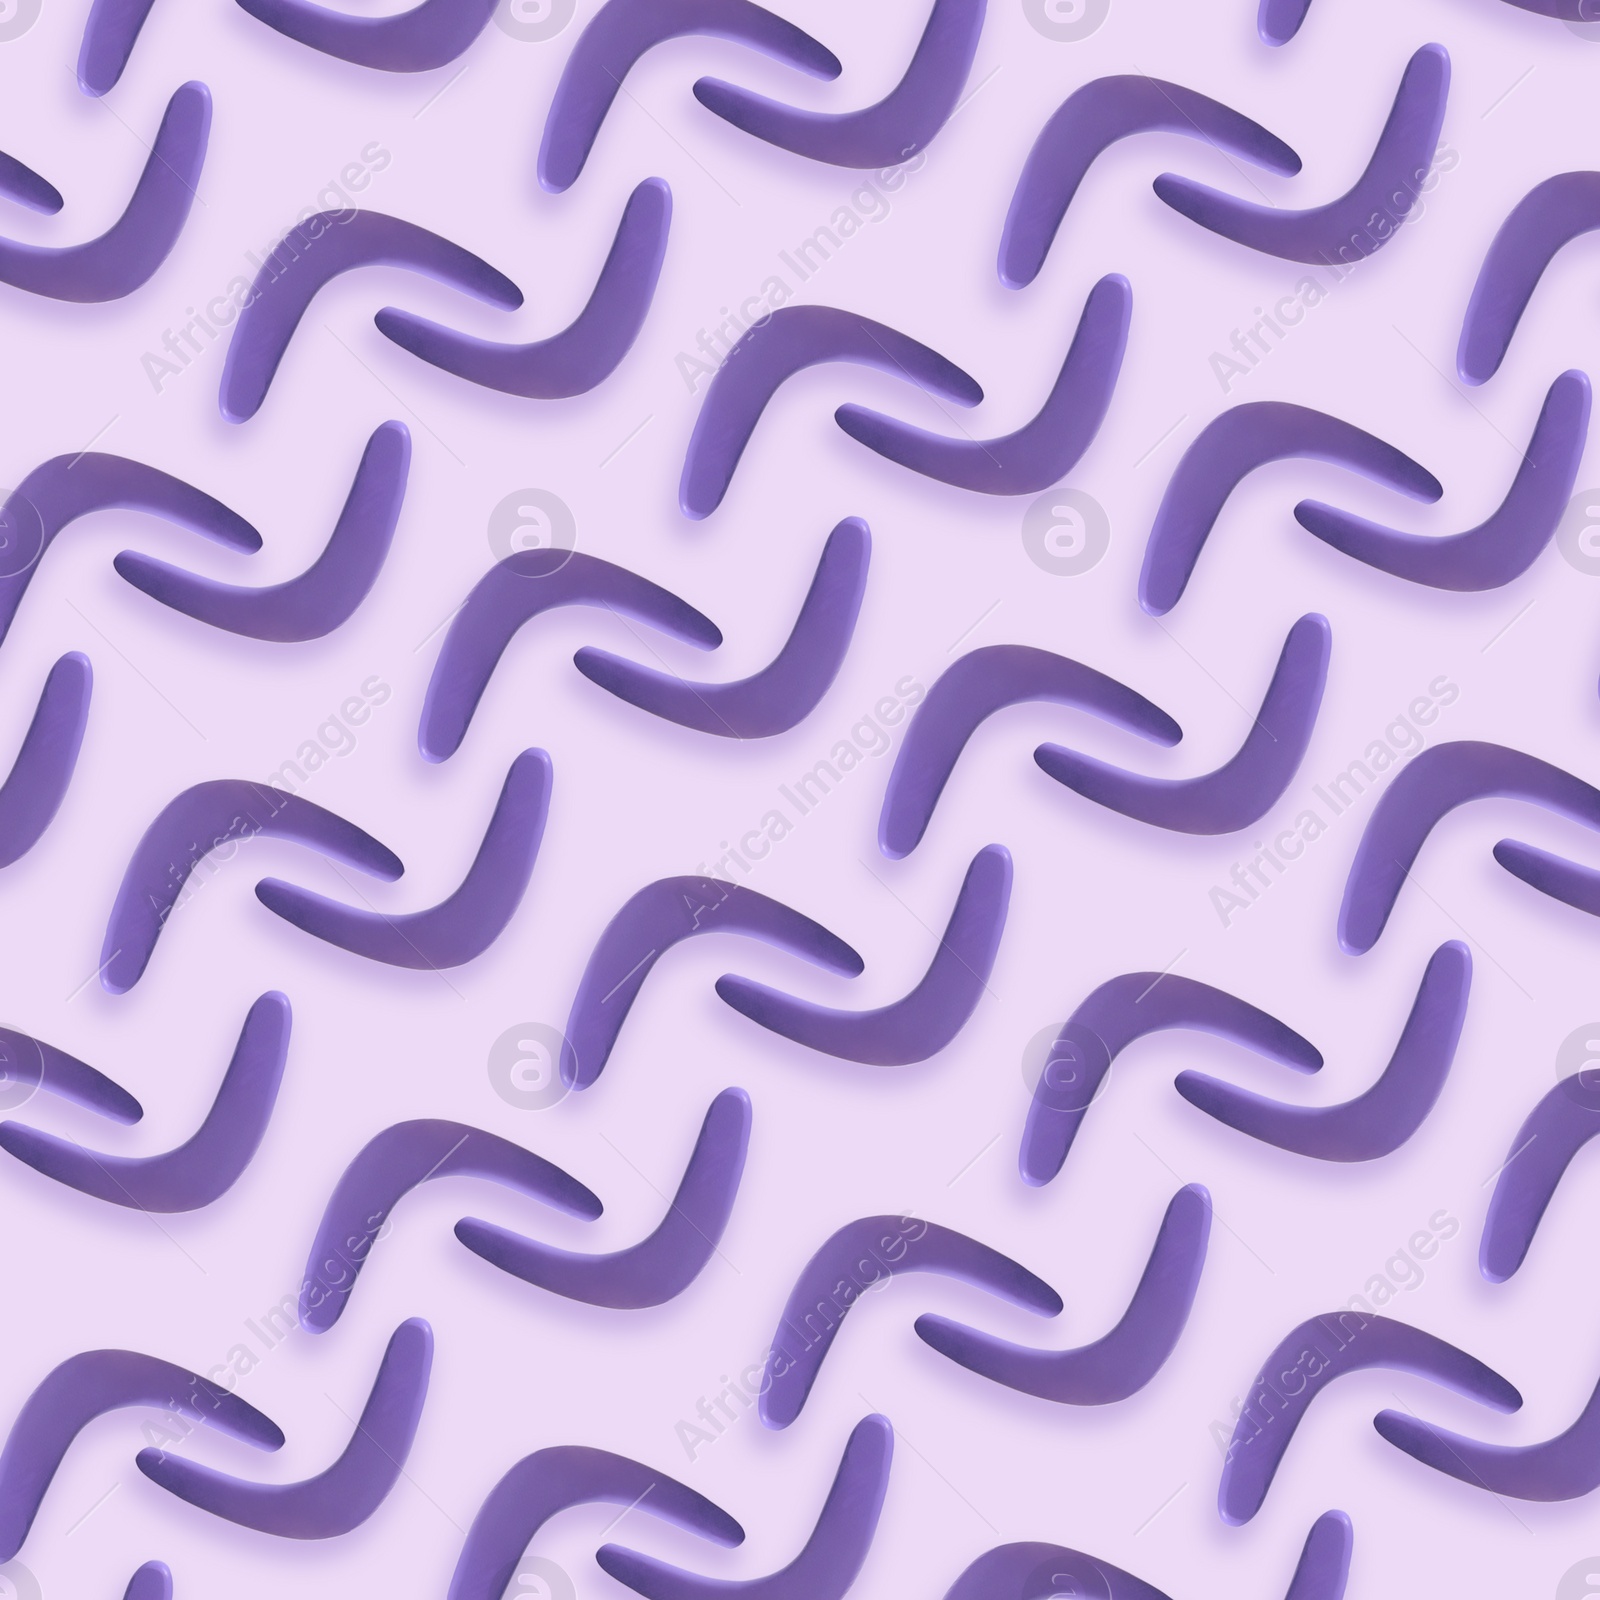 Image of Violet boomerangs on light background, flat lay